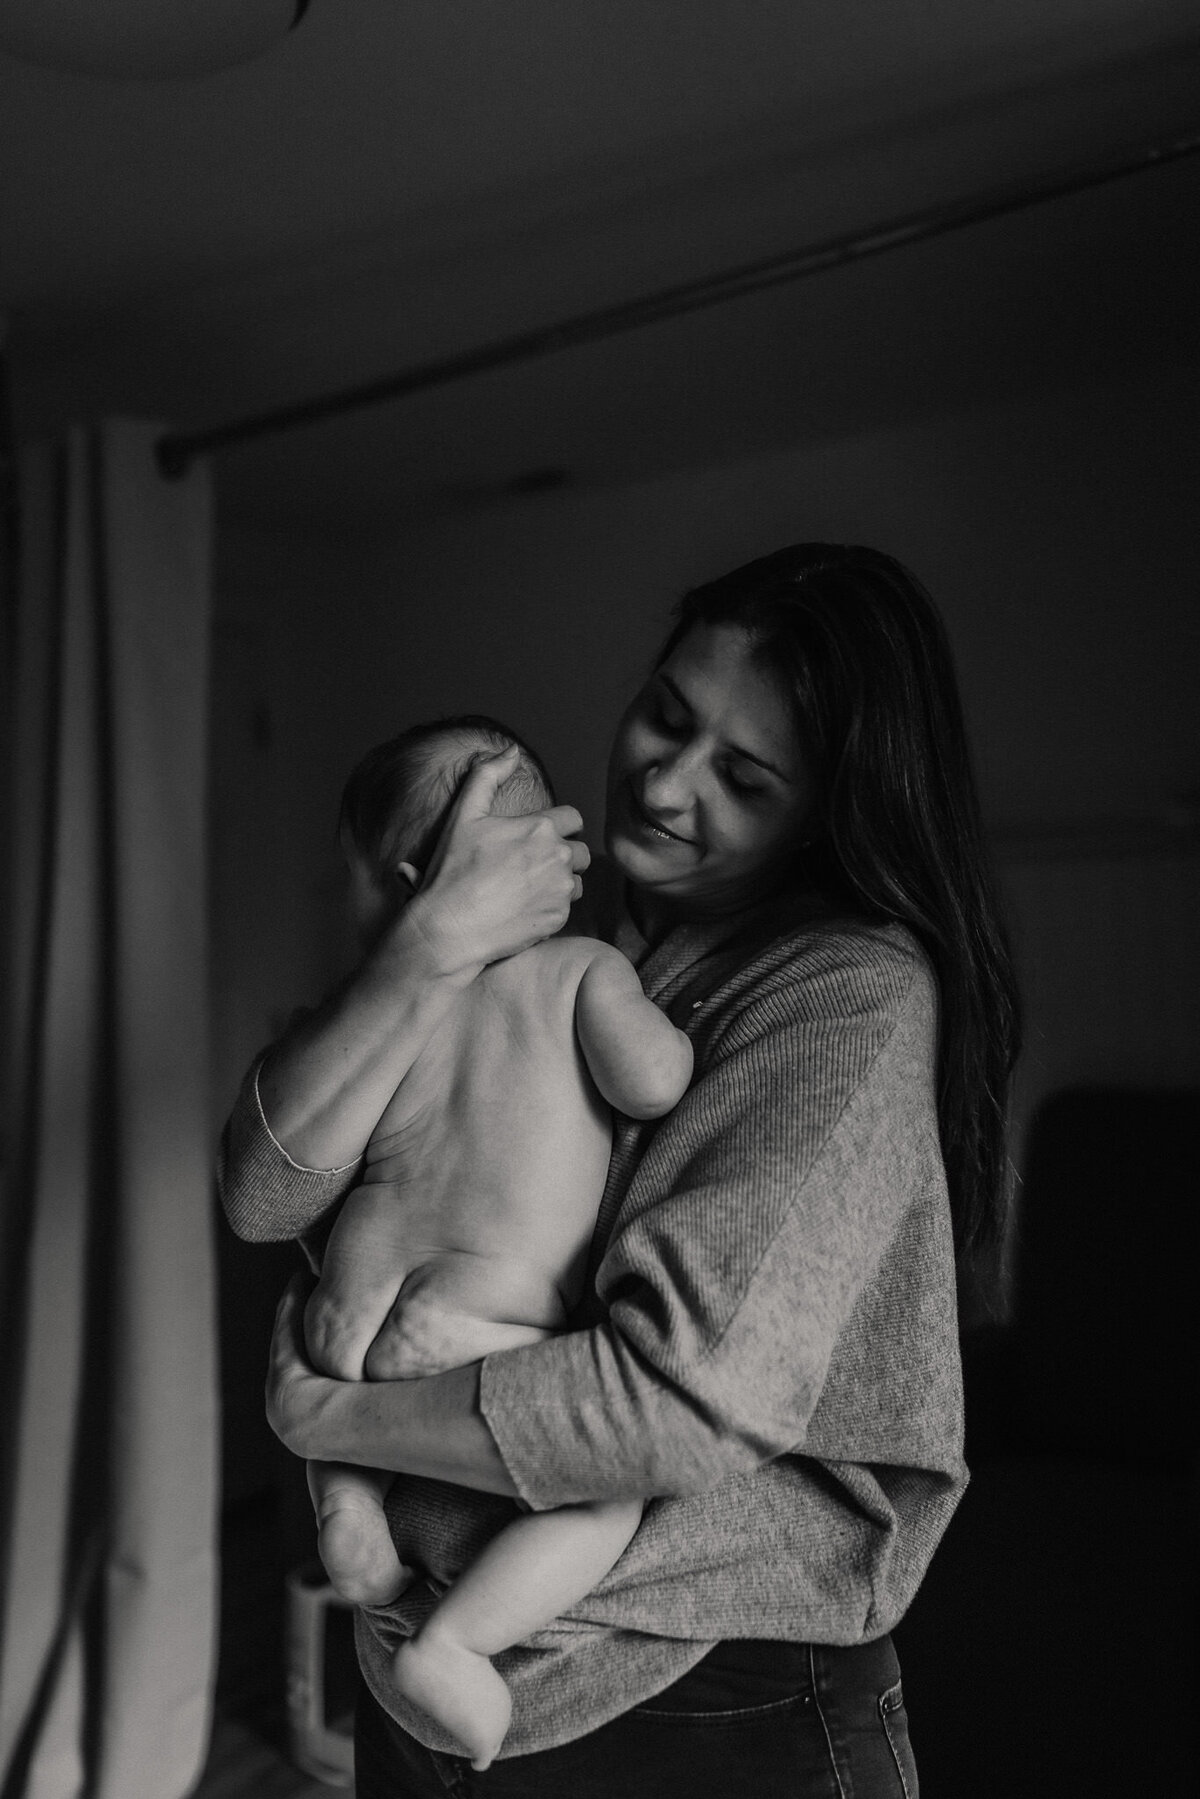 San Francisco mom snuggles baby after bath time at in home family photography session